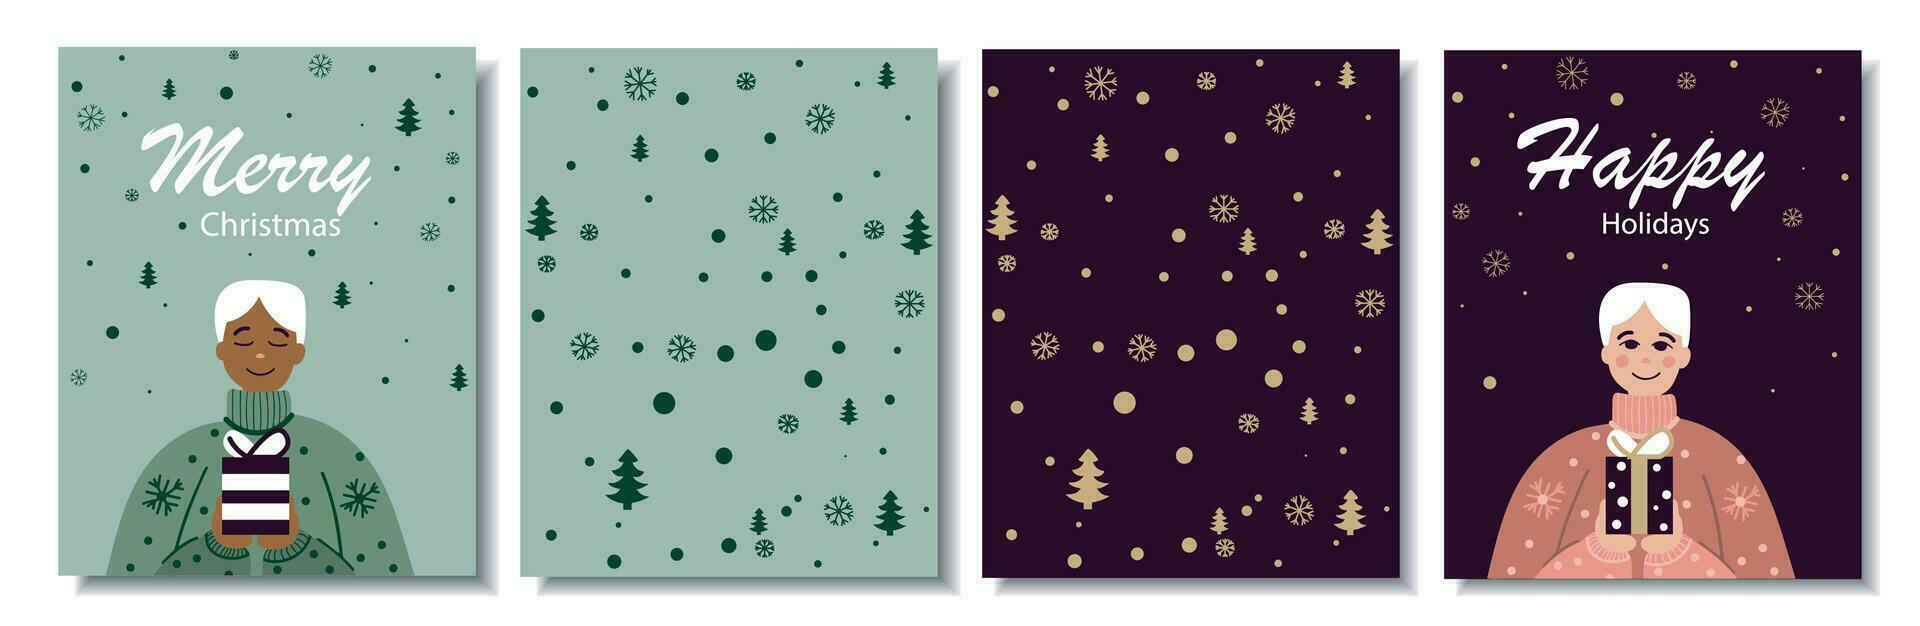 Set of postcards for Christmas and New Year 2 sides. Minimalistic background for greetings, banners, covers. Greeting card design template for printing vector